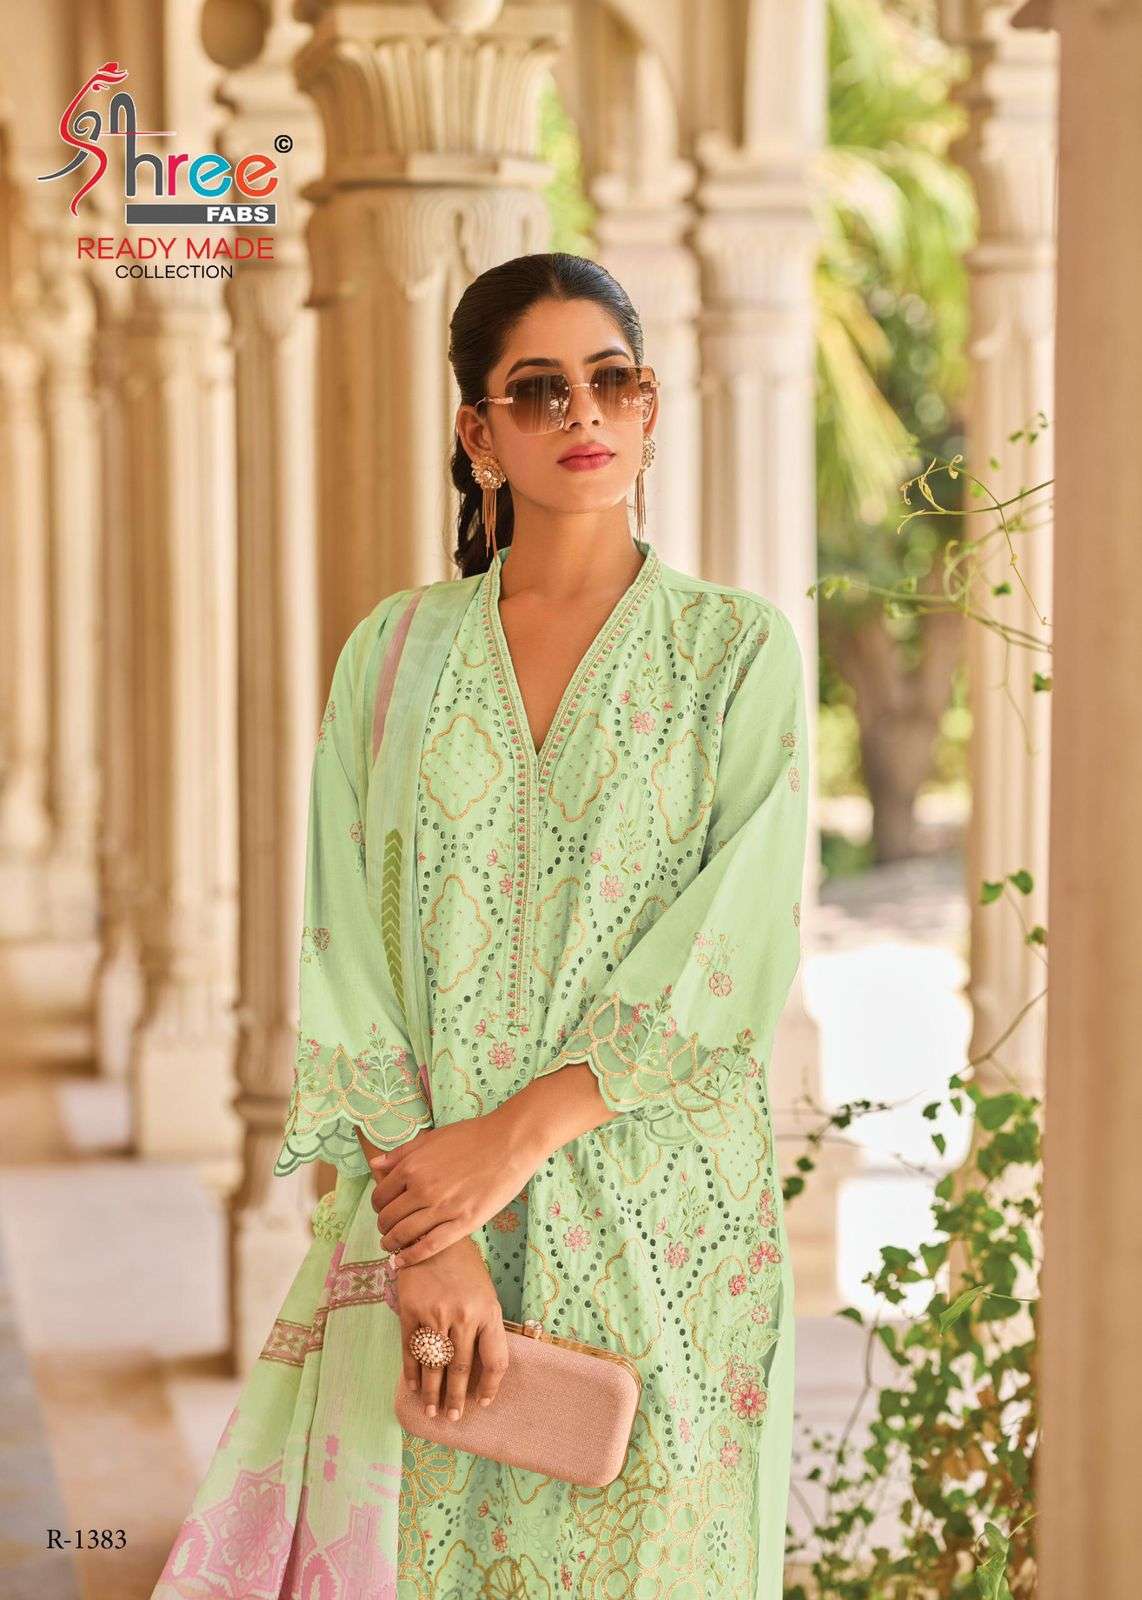 shree fabs 1383 designer party wear cambric cotton lawn ready made pakistani salwar kameez collection wholesale price surat 